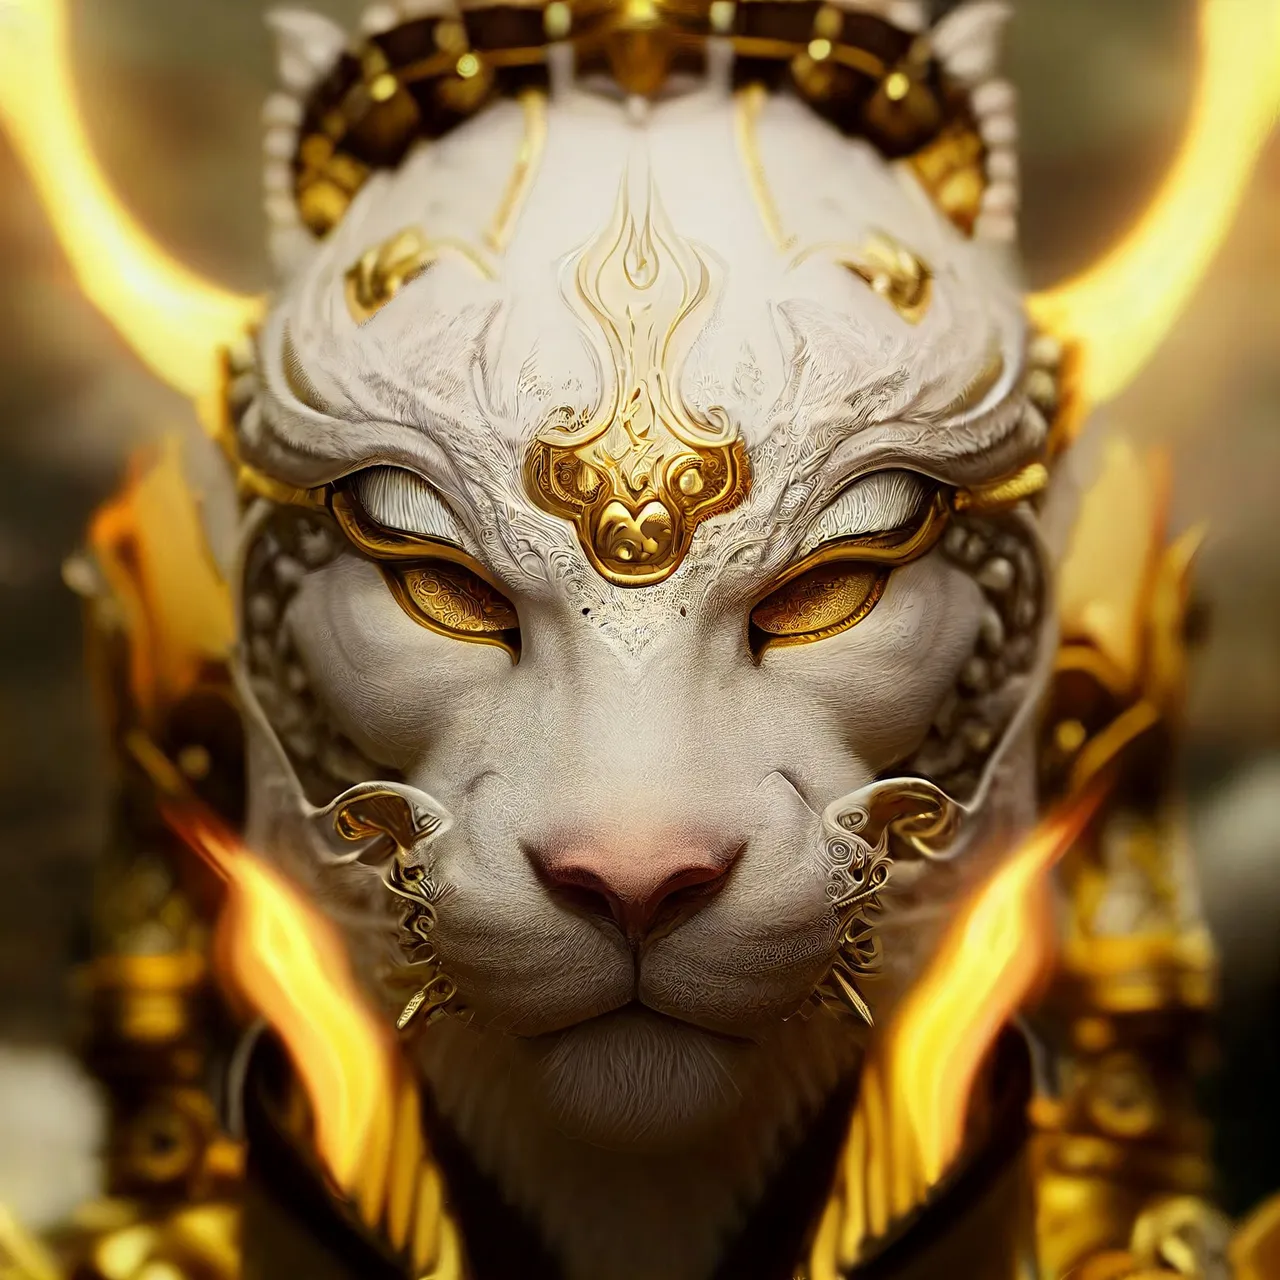 Ed_Privat_beautiful_white_panther_god_surreal_mythical_dreamy_a_b57de7db-8225-4501-bf4a-10456d103476.png